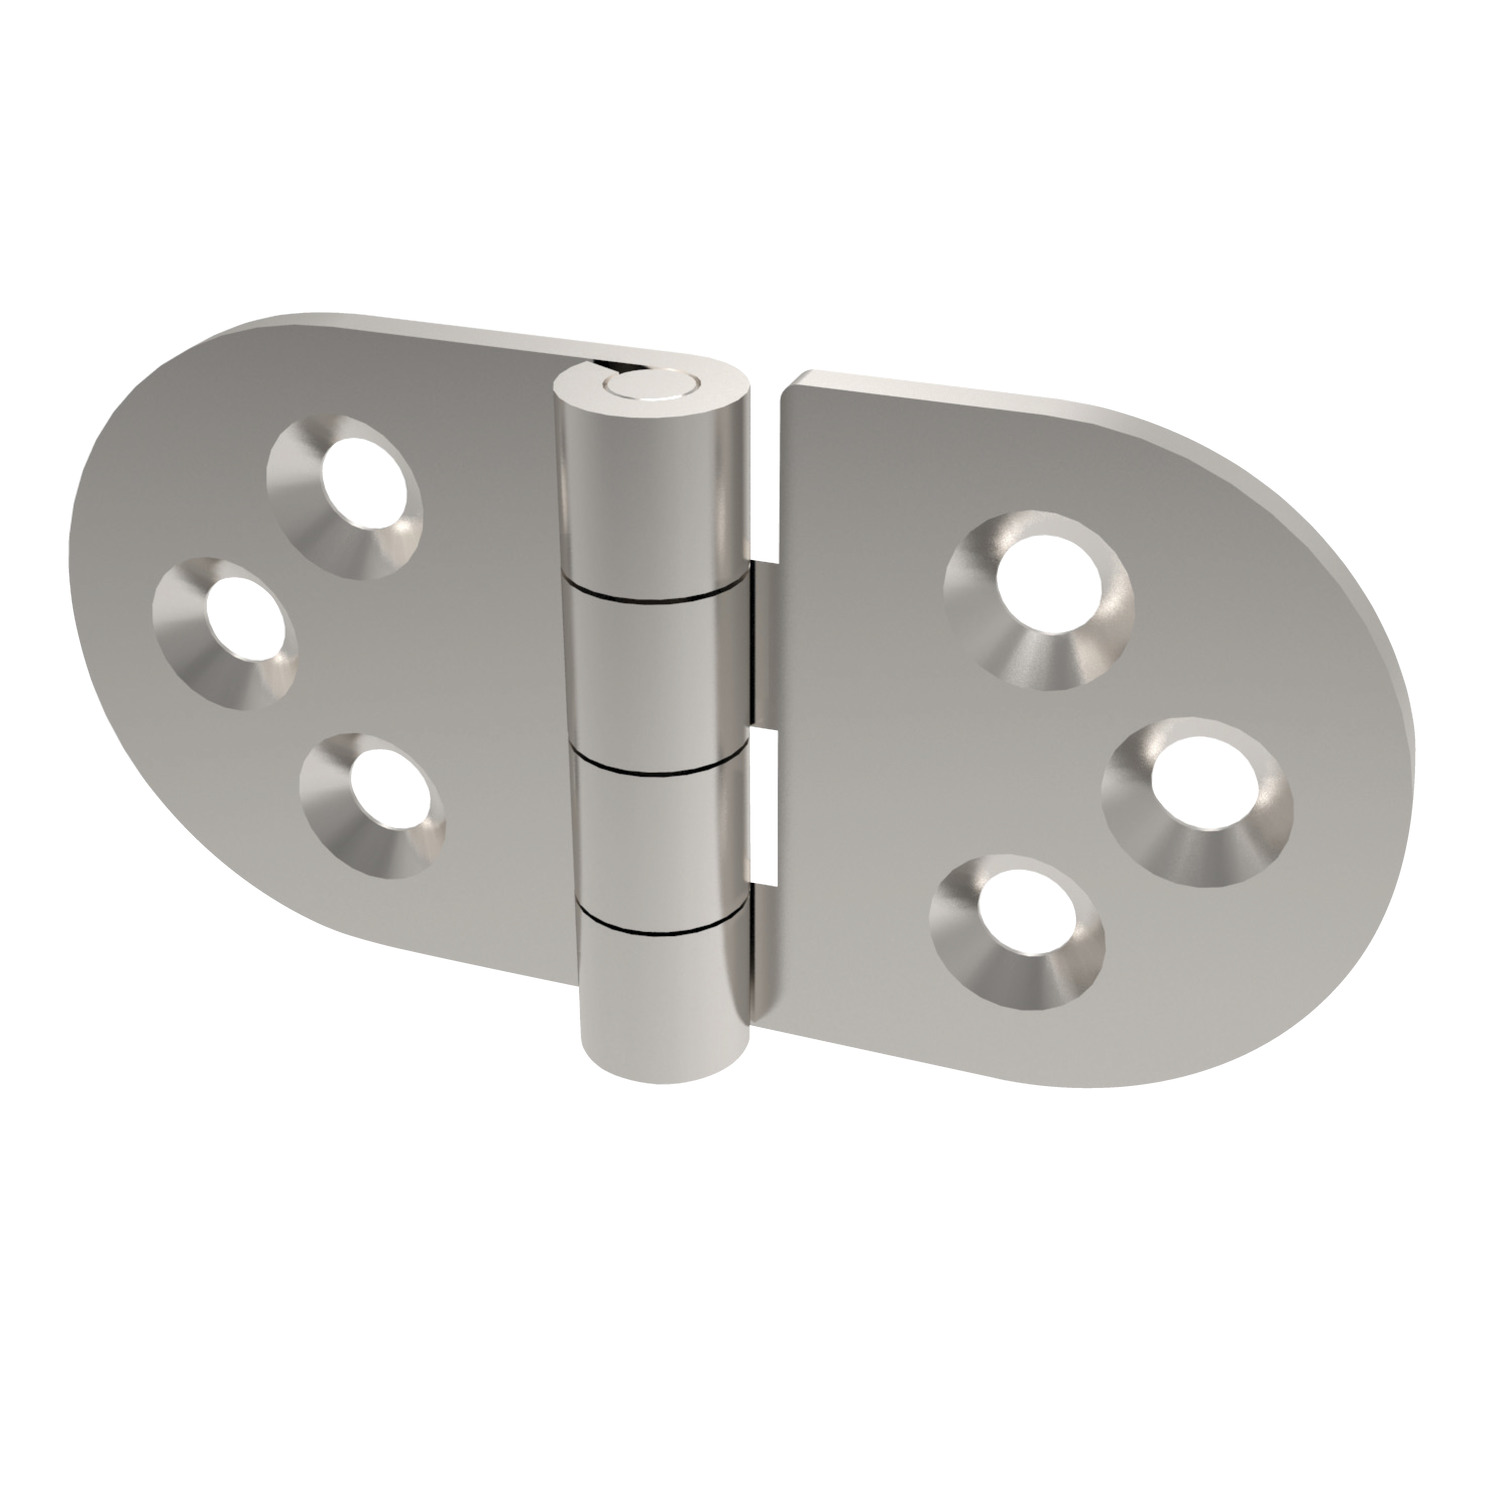 Surface Mount - Leaf Hinges This suface mount leaf hinge is made from stainless steel